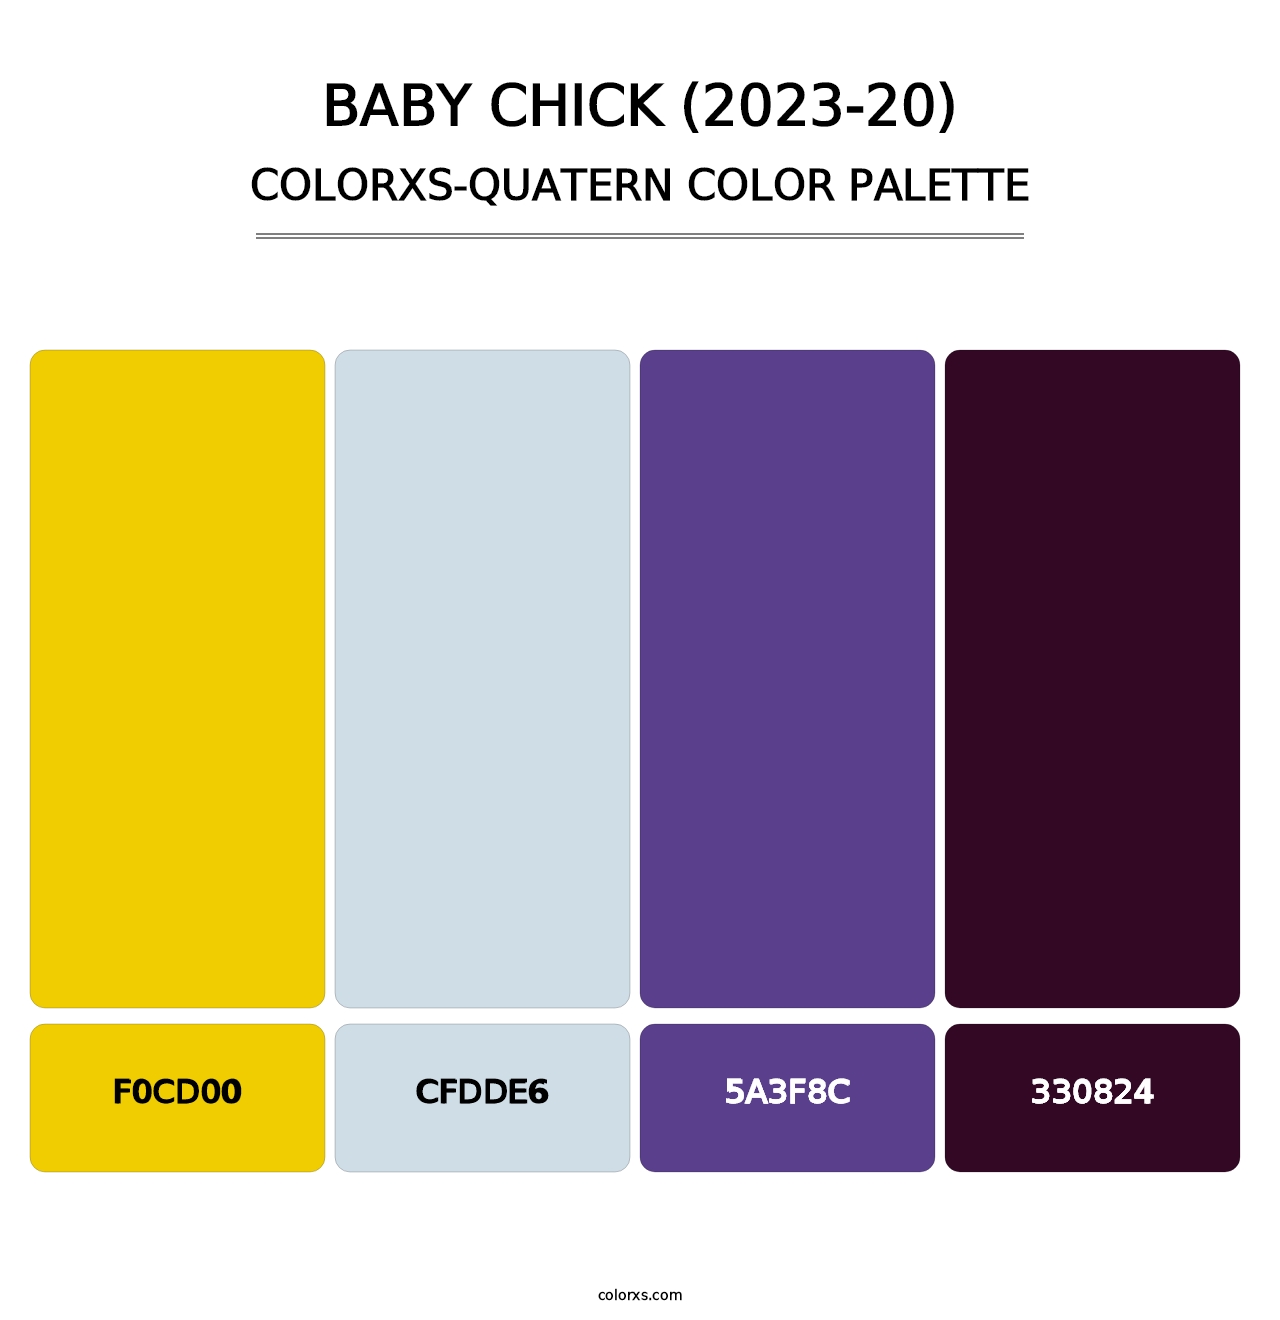 Baby Chick (2023-20) - Colorxs Quatern Palette